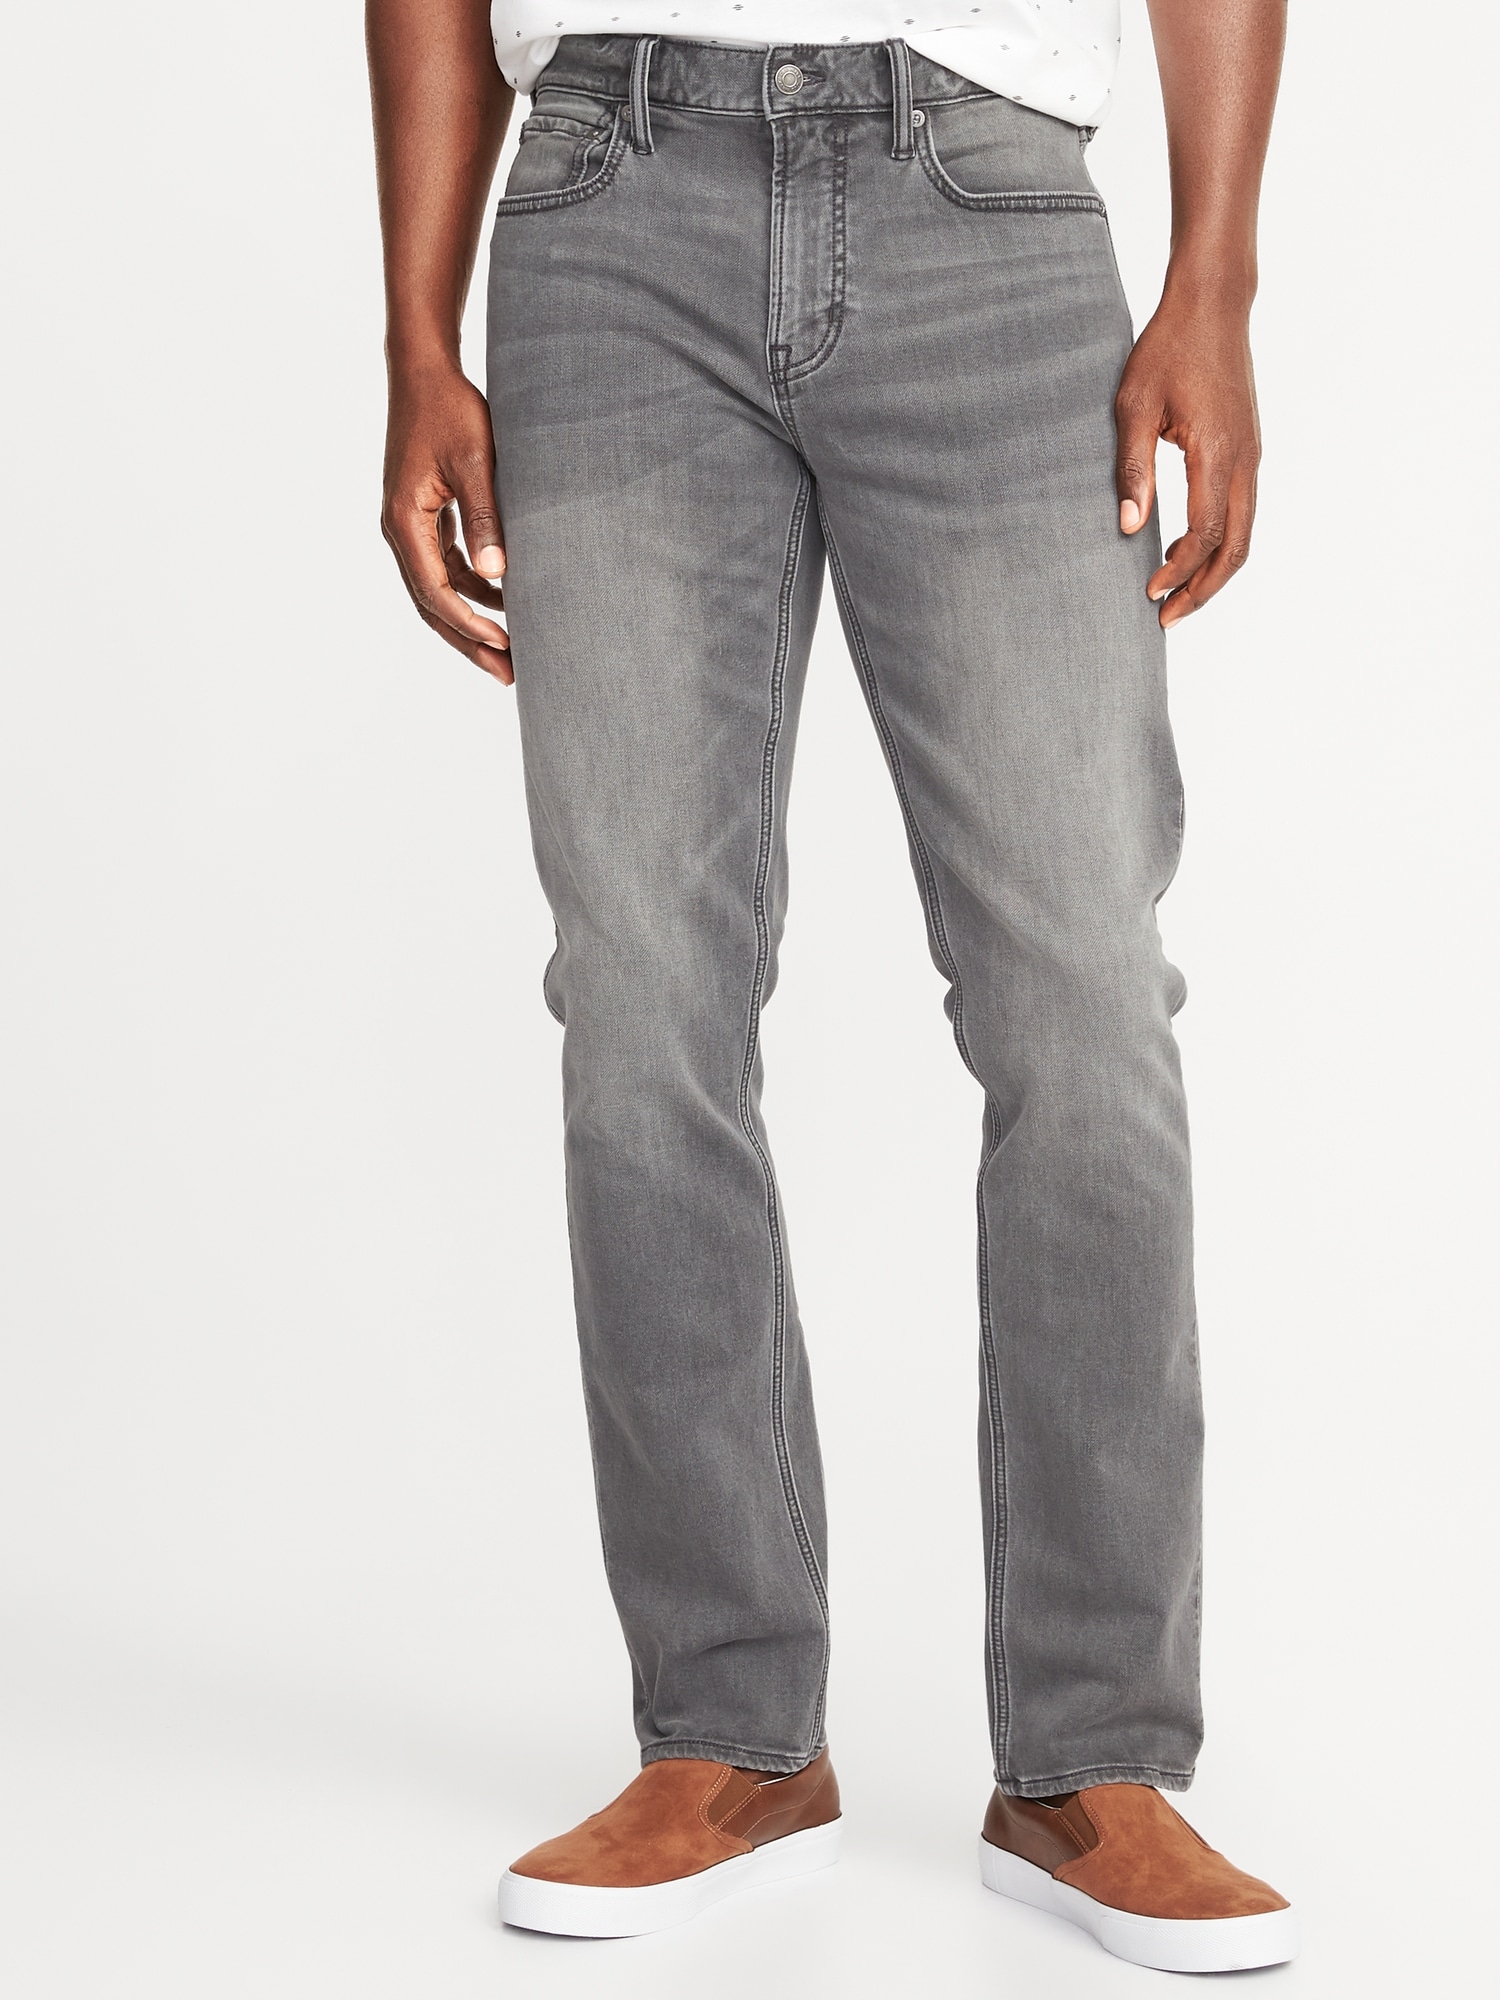 old navy grey jeans